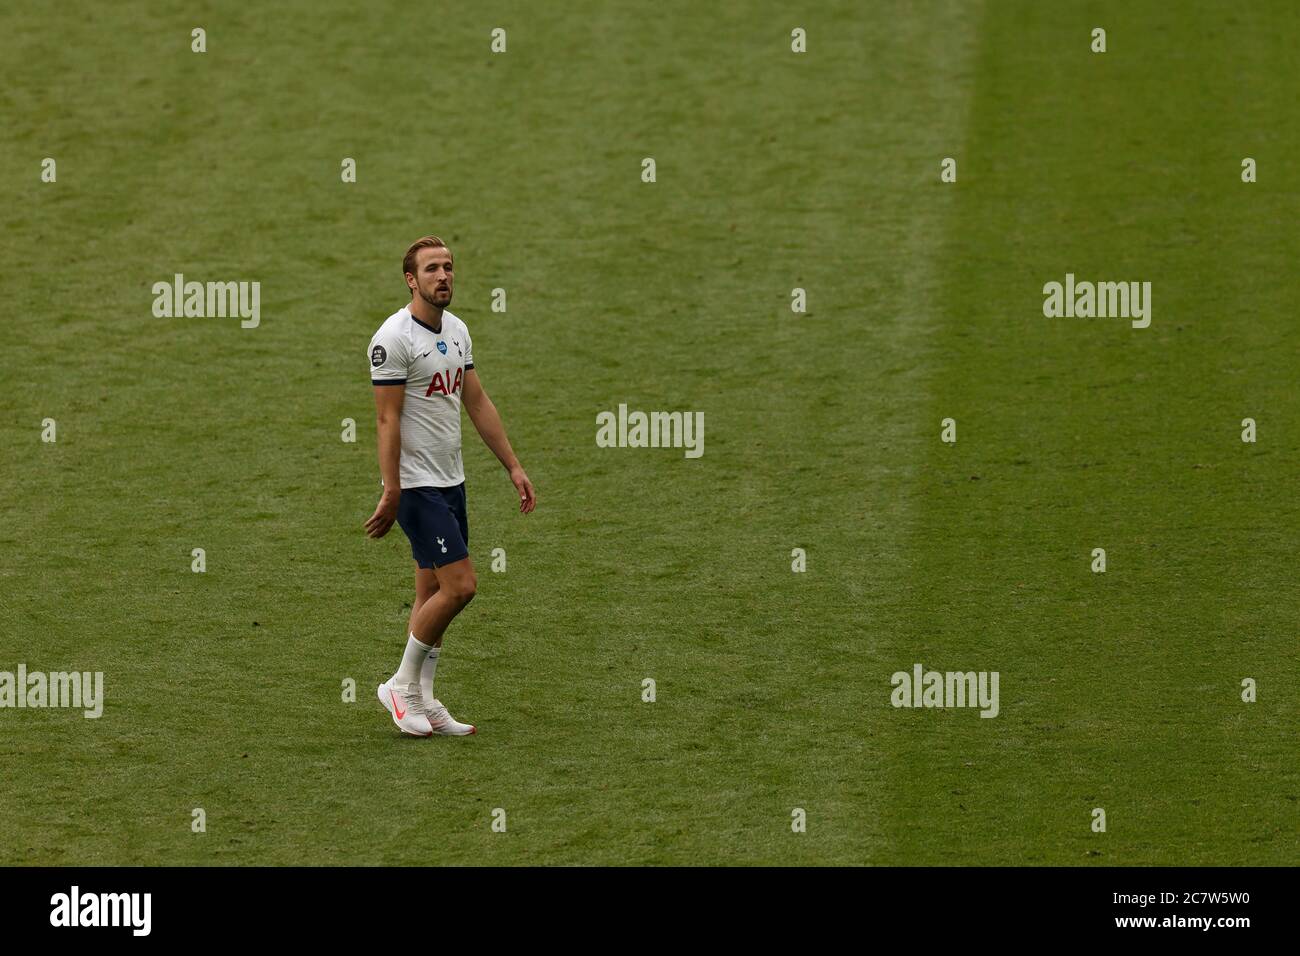 London, UK. 19th July, 2020. Harry Kane of Tottenham Hotspur crosses the pitch to fulfill his media duties after the Premier League match between Tottenham Hotspur and Leicester City at the Tottenham Hotspur Stadium on July 19th 2020 in London, England. (Photo by Daniel Chesterton/phcimages.com) Credit: PHC Images/Alamy Live News Stock Photo